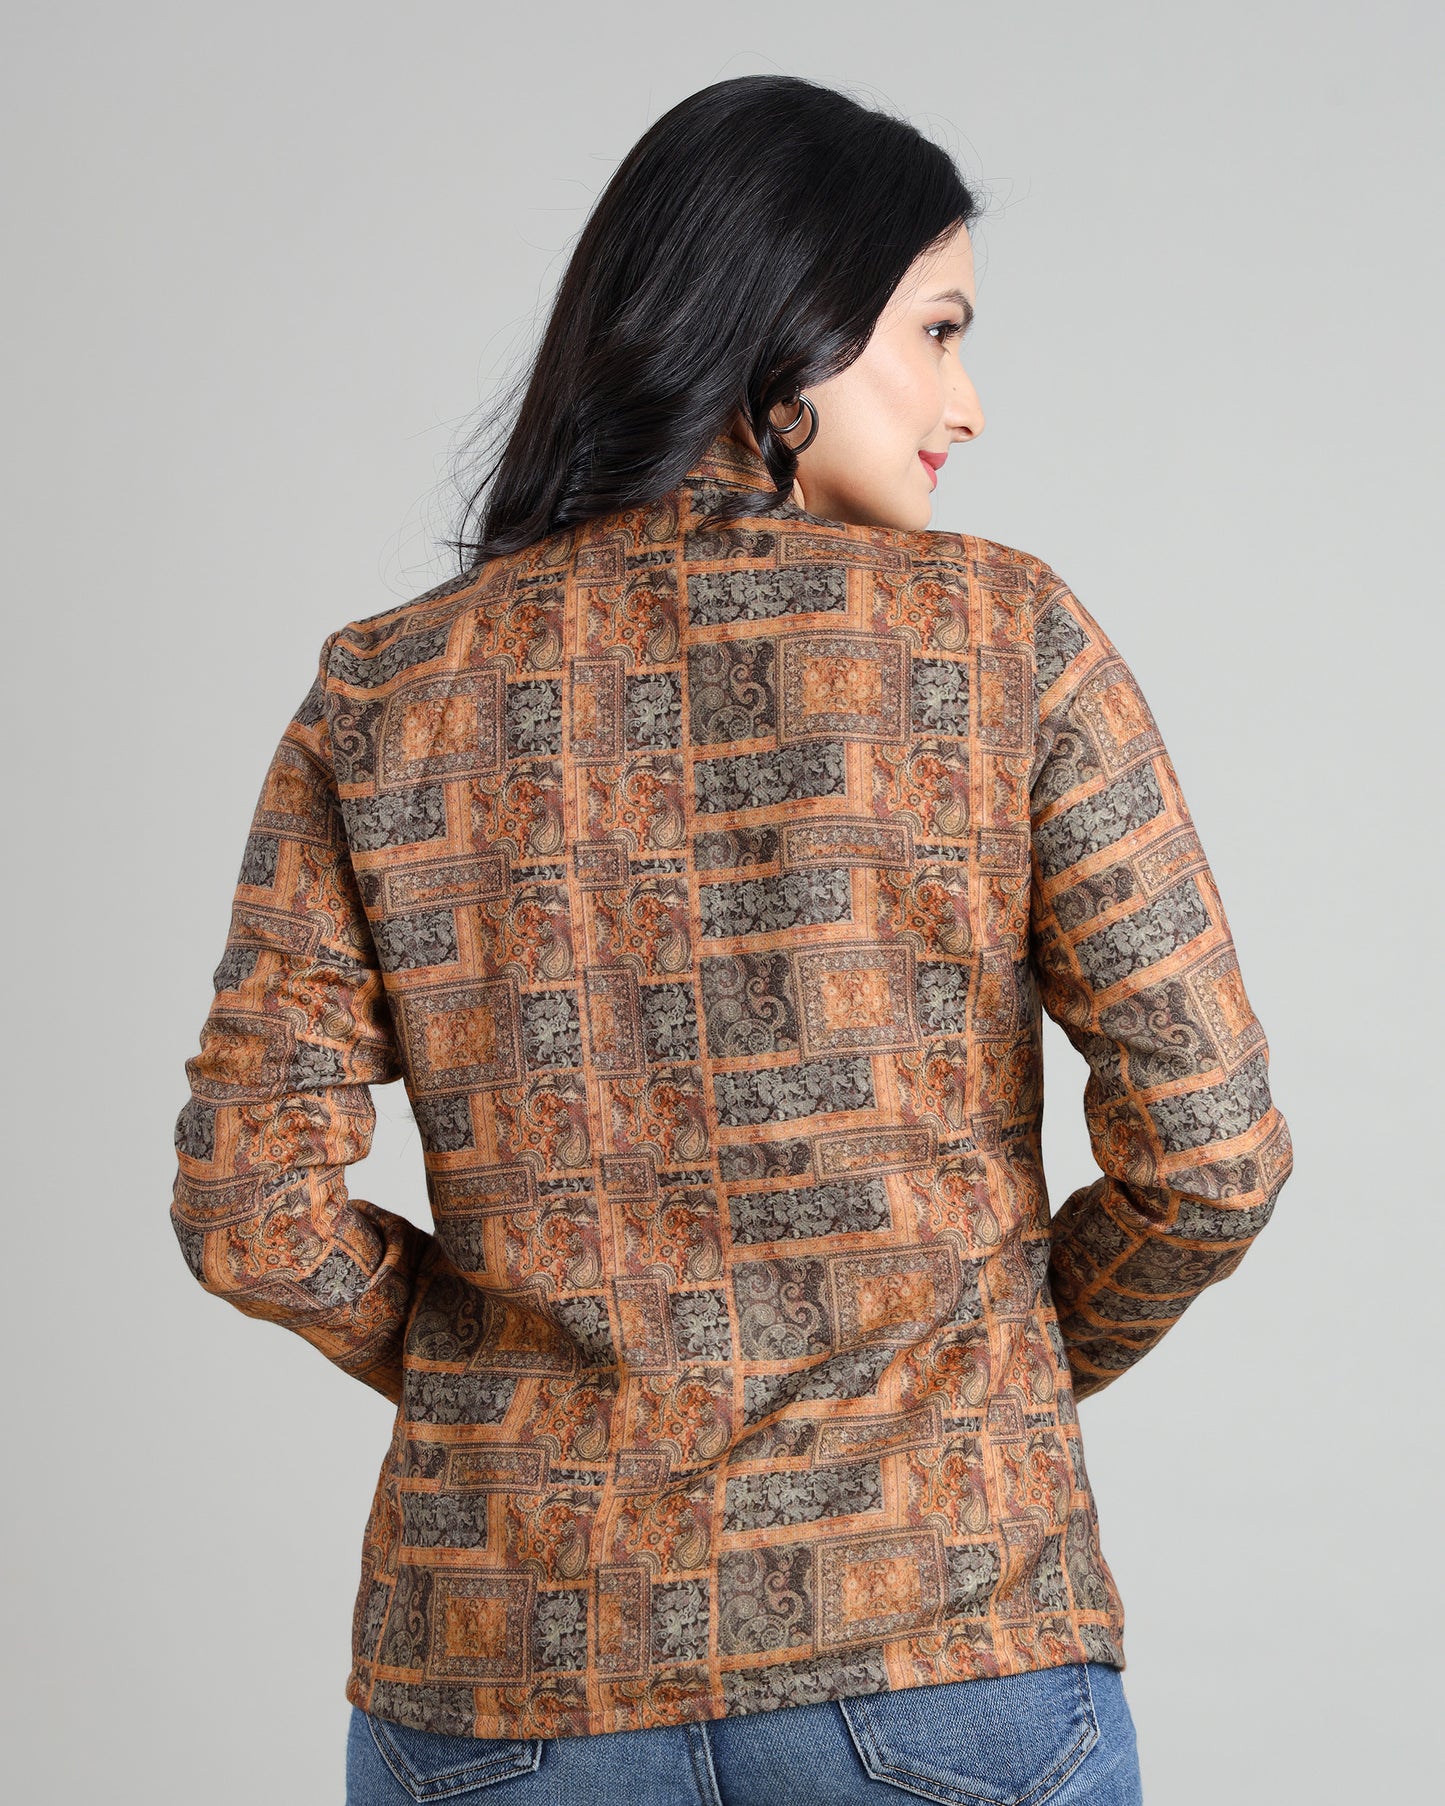 Pashmina Luxe: A Jacket For The World Stage